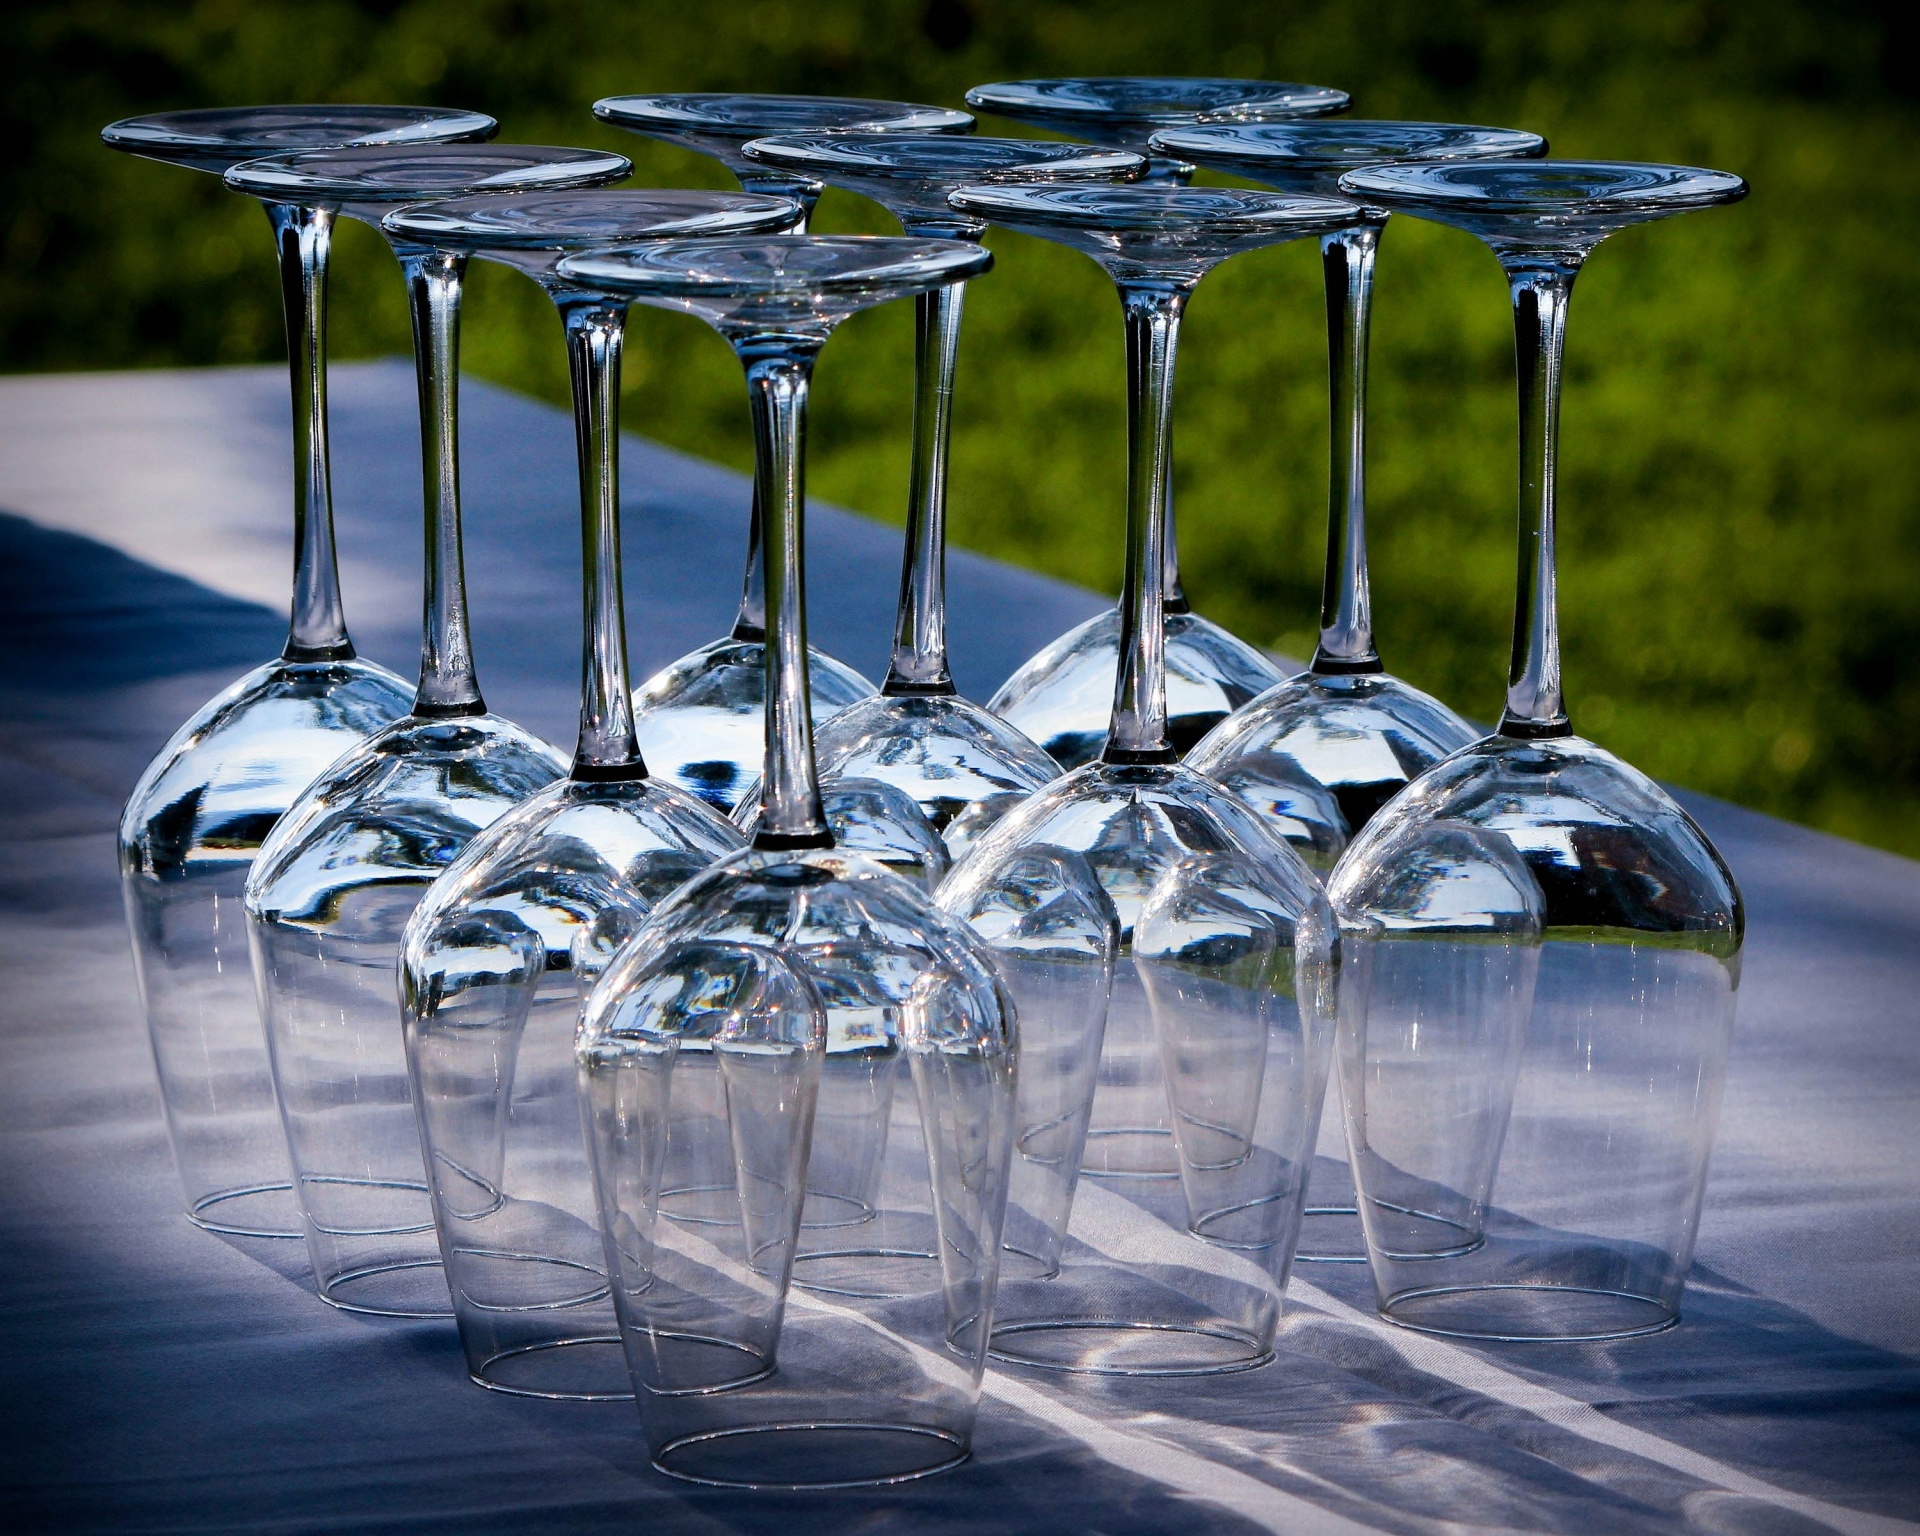 Rows of clean and empty wine glasses standing upside down